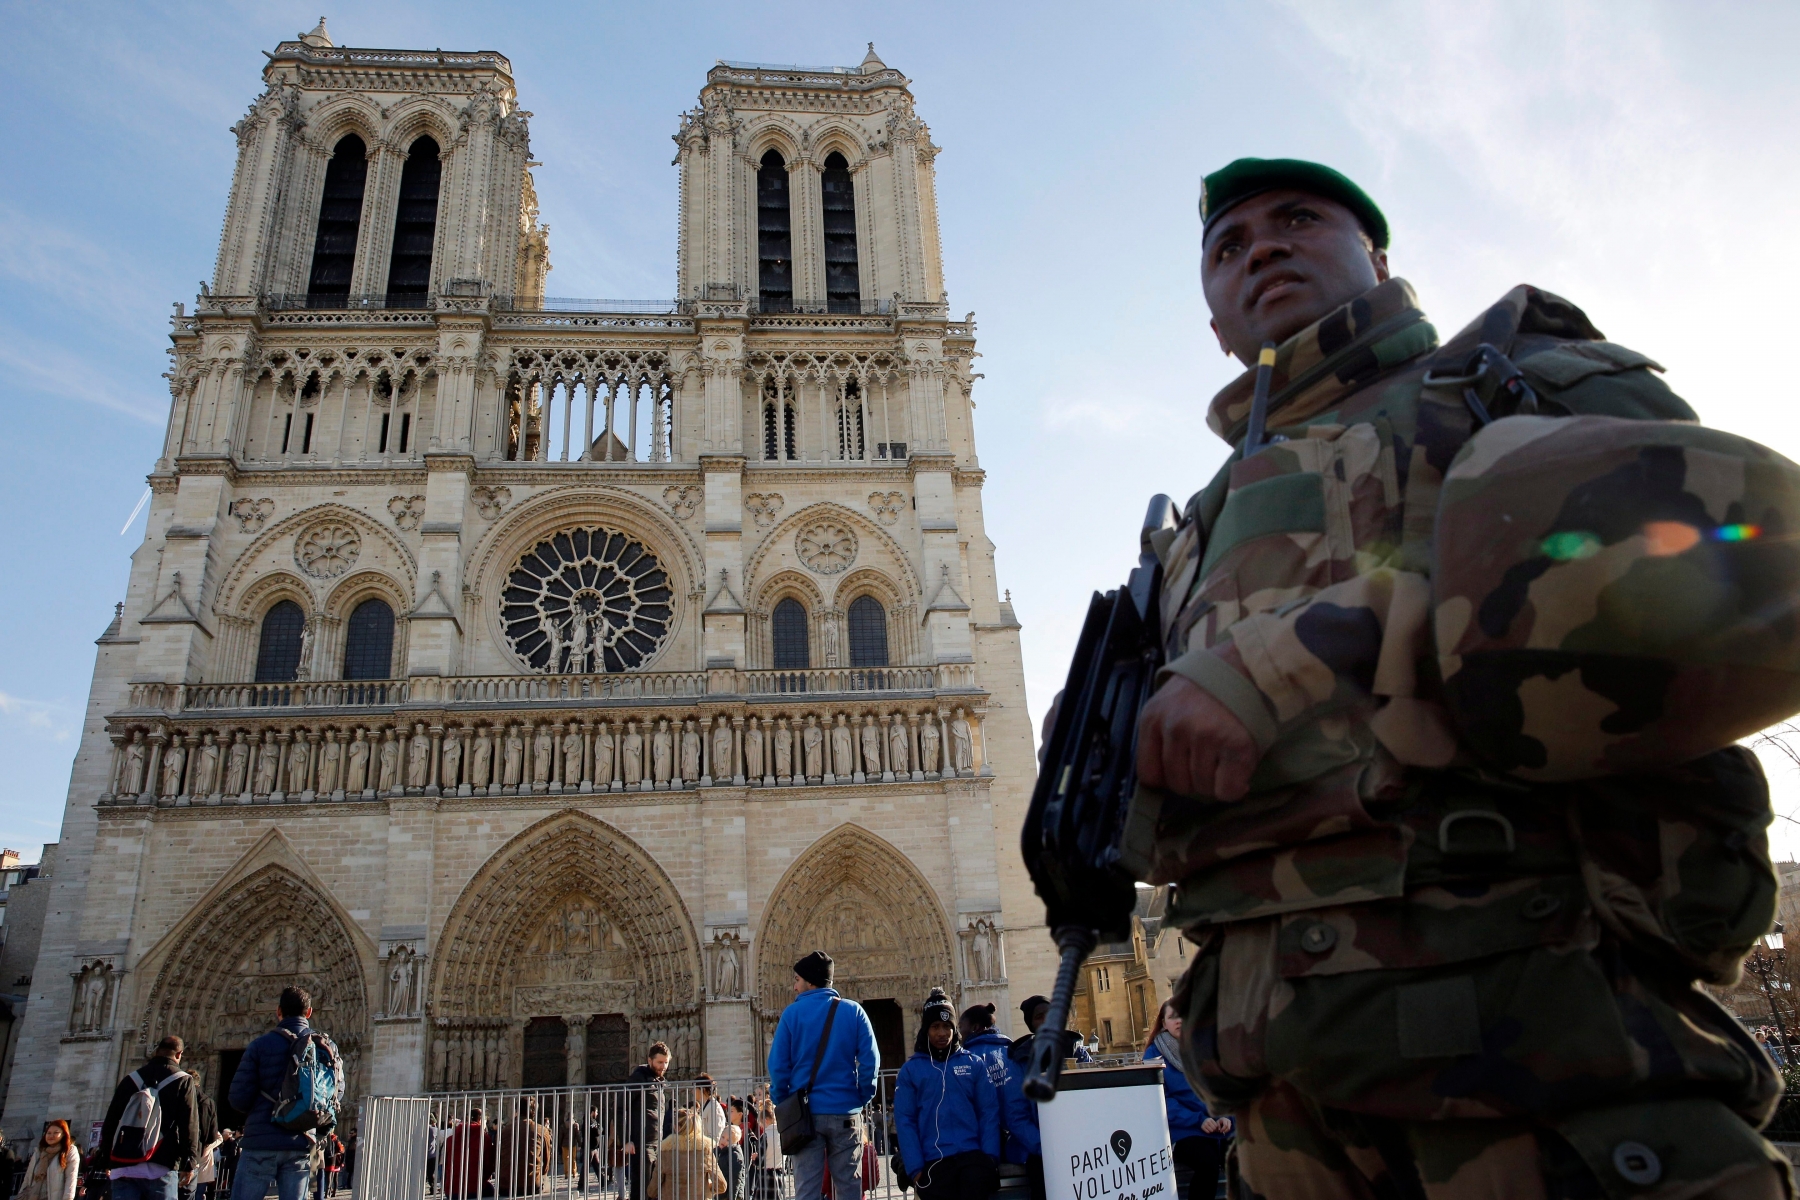 A soldier patrols in front of Notre Dame cathedral, in Paris, Wednesday, Dec. 23, 2015. France's interior minister says the government will tighten security for churches around Christmas, amid continued concerns about potential extremist violence after deadly attacks last month. (AP Photo/Christophe Ena) France Holiday Security